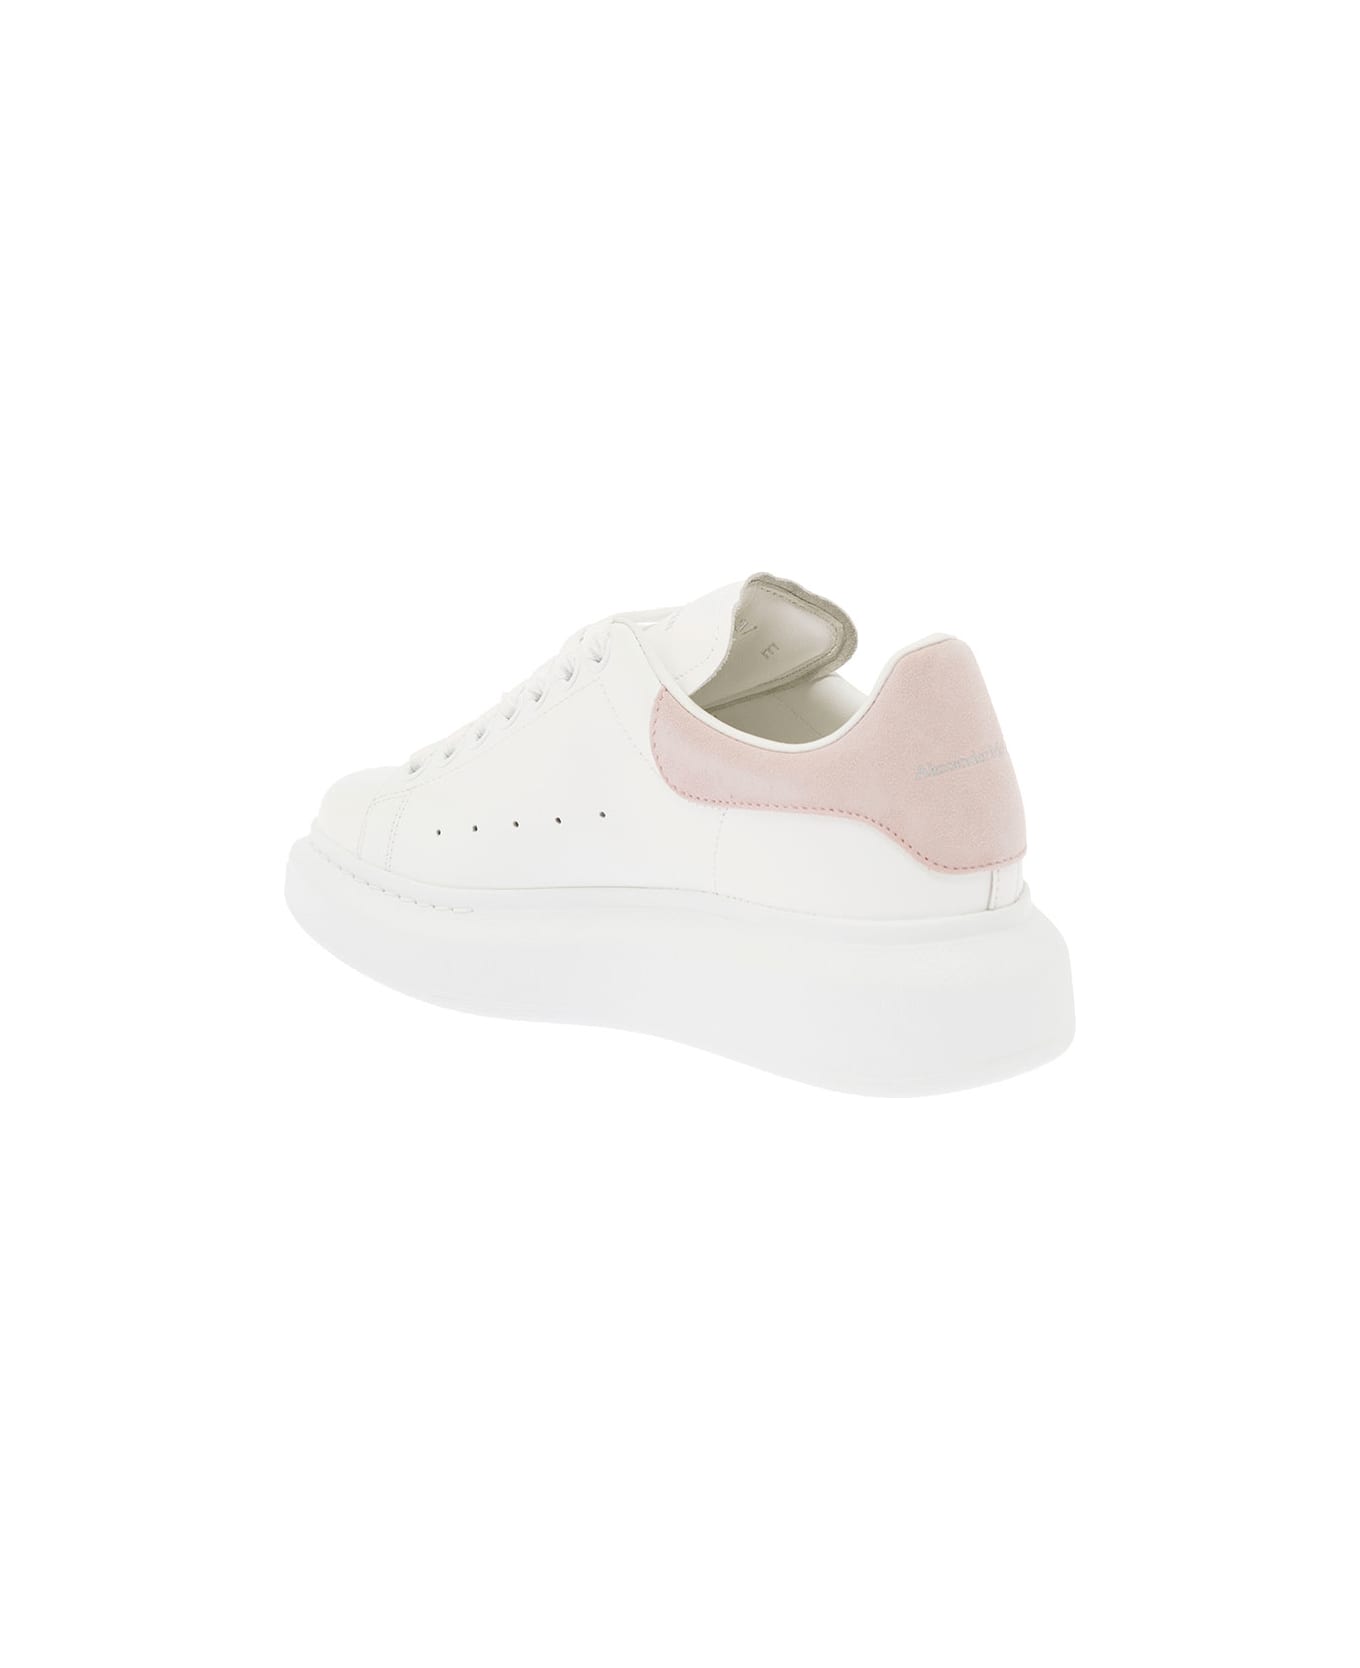 Alexander McQueen Woman's Oversize White And Pink Leather Sneakers - White